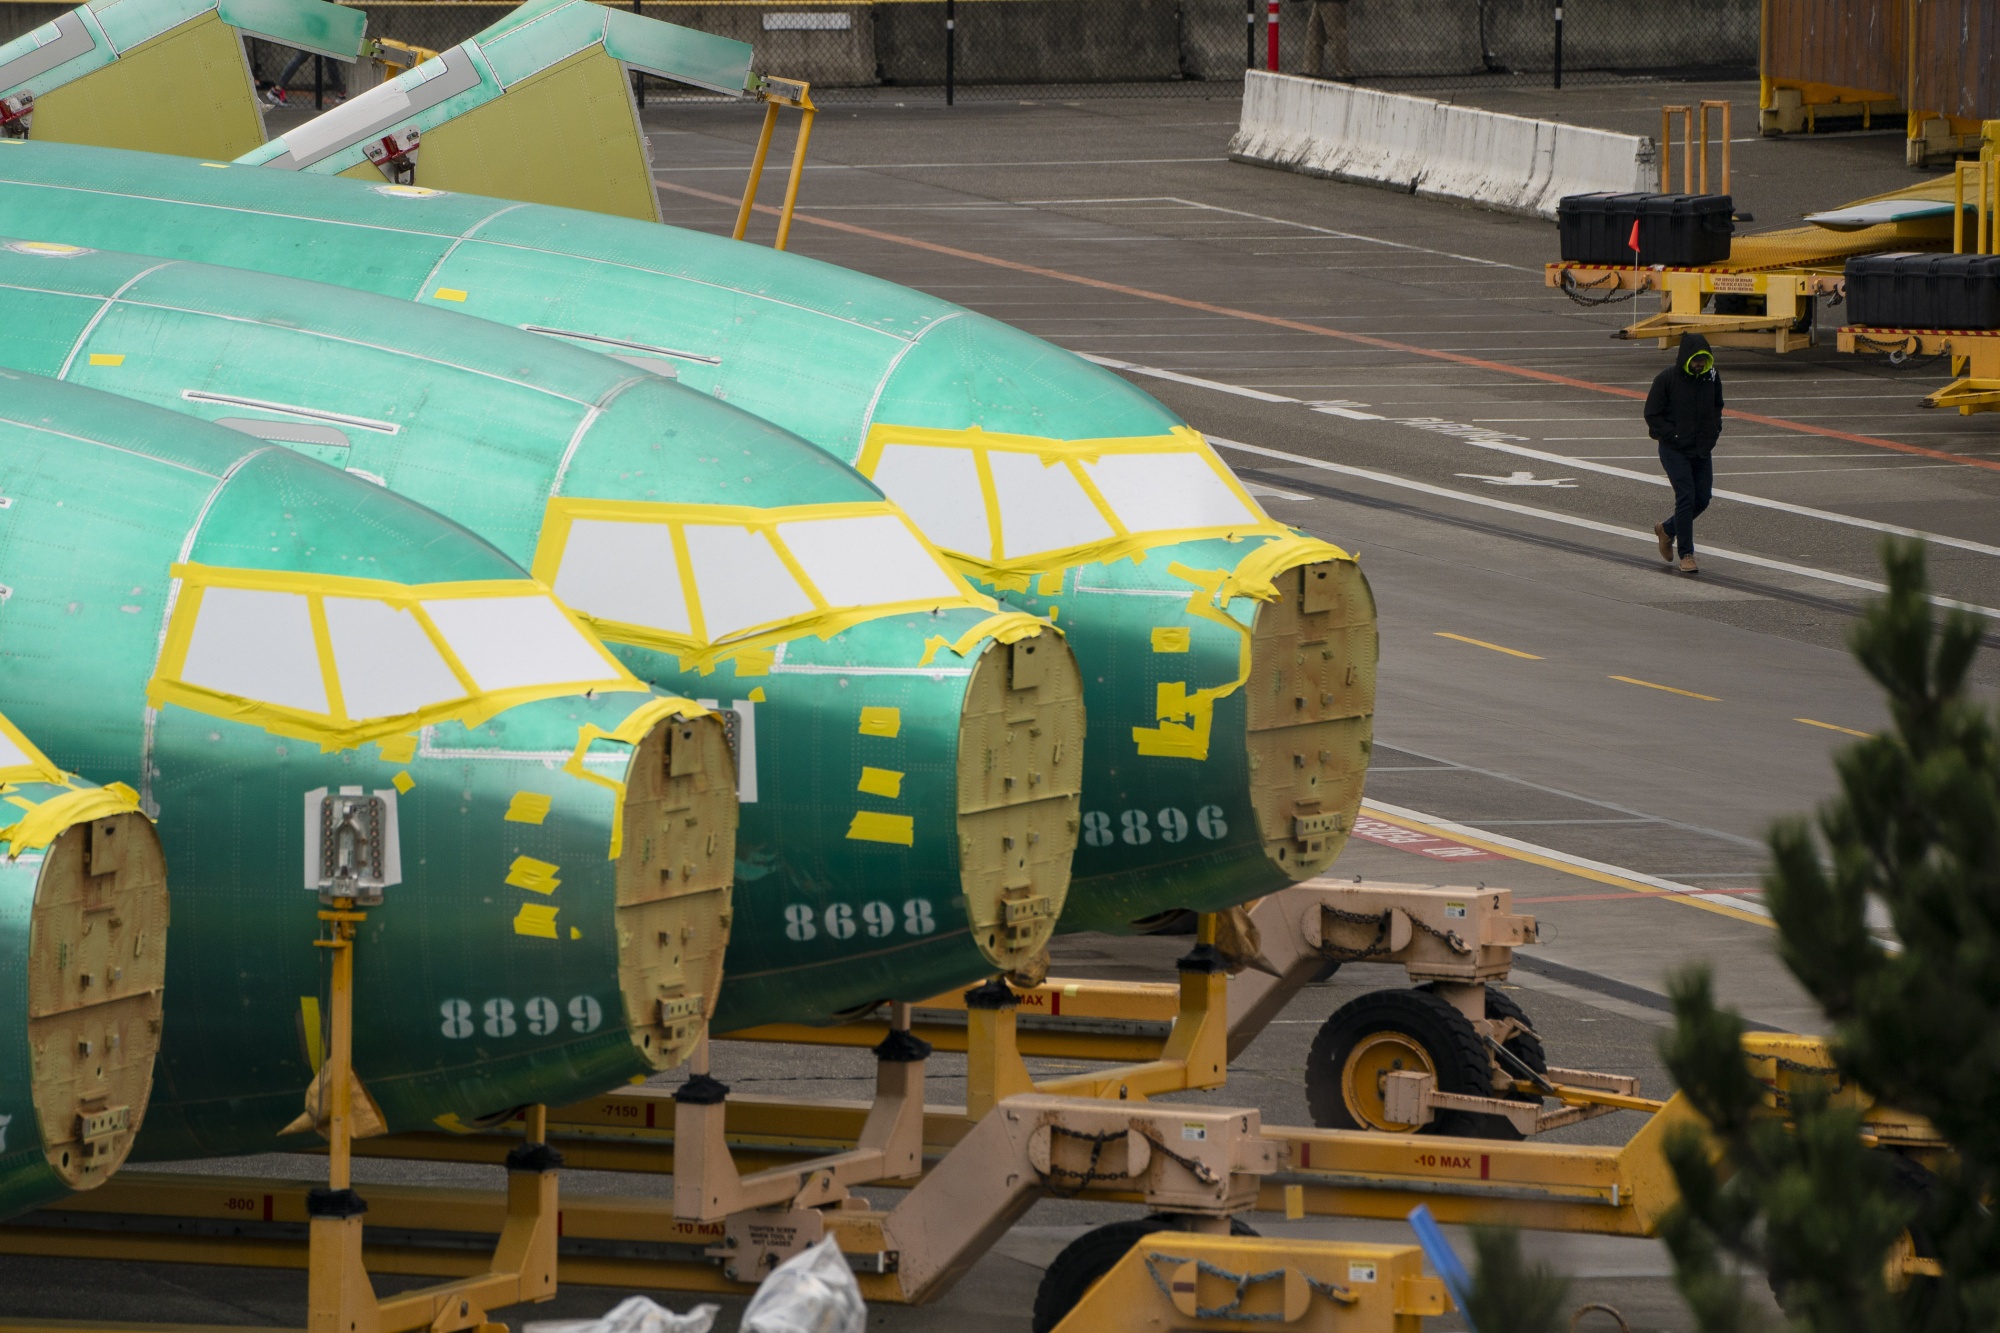 Fuselages outside the Boeing manufacturing facility in Washington.